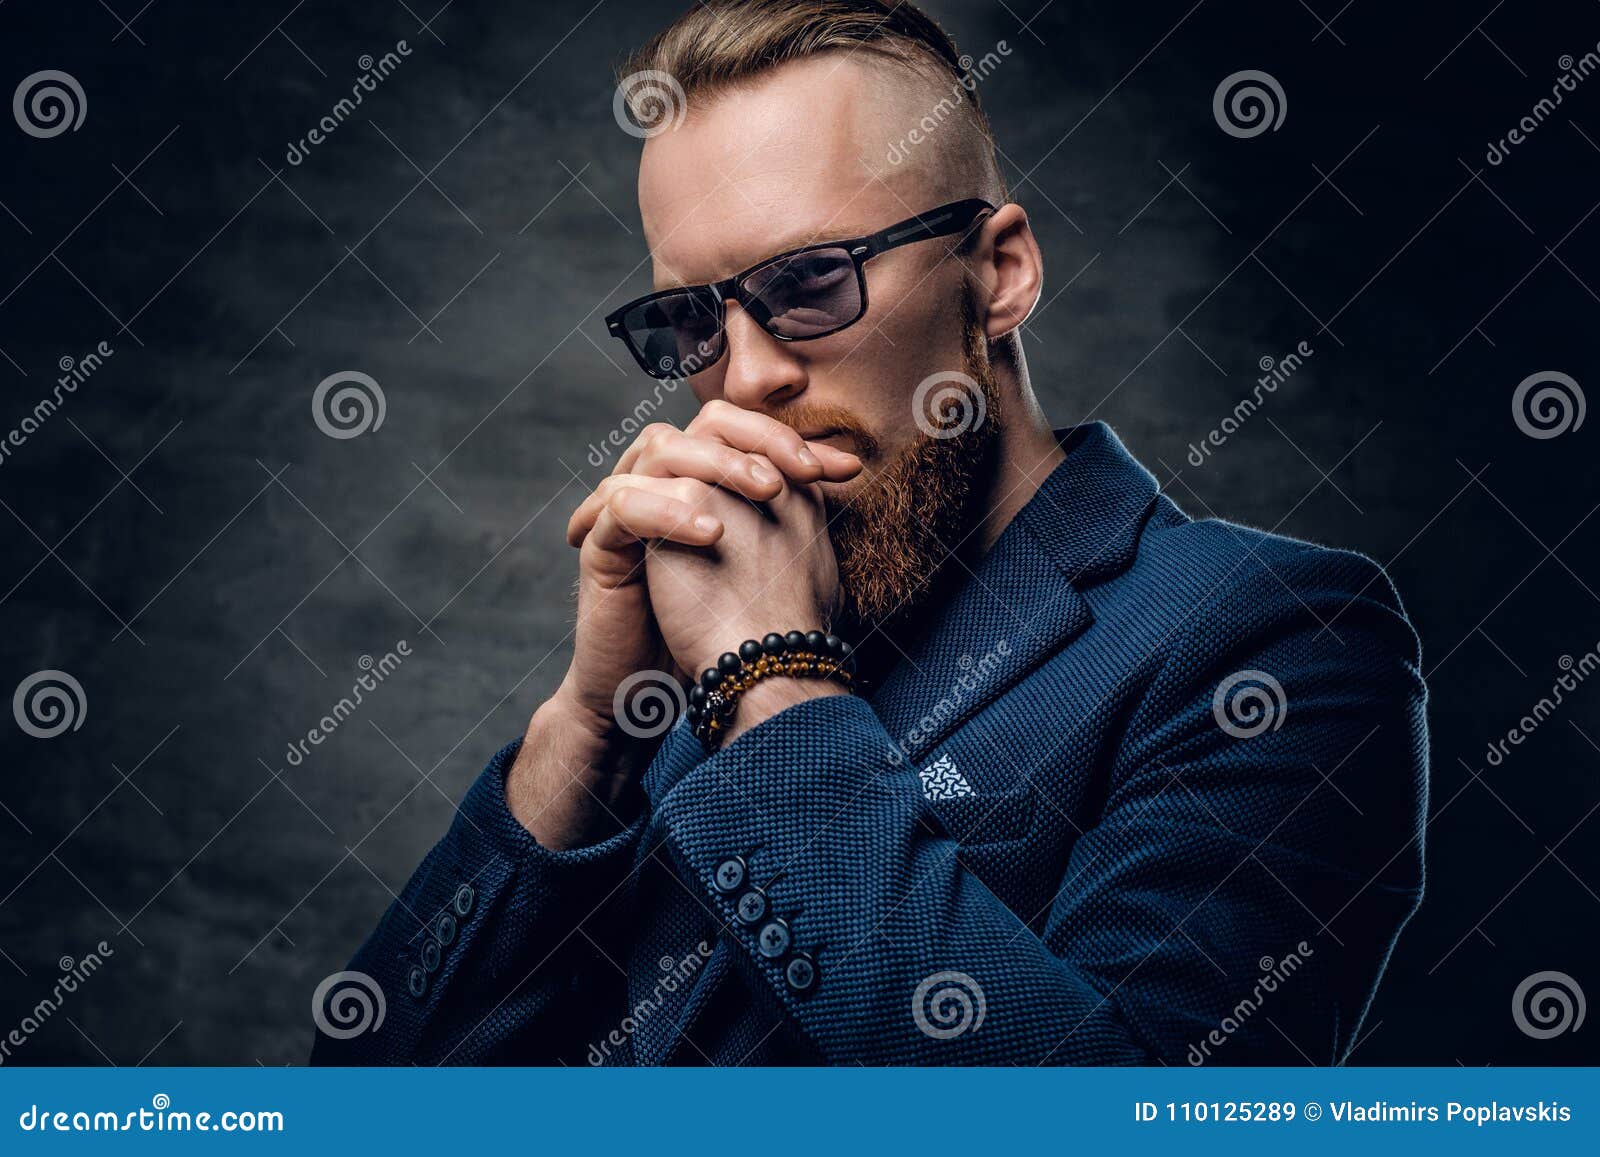 Redhead Male Dressed in a Blue Suit and Sunglasses. Stock Image - Image ...